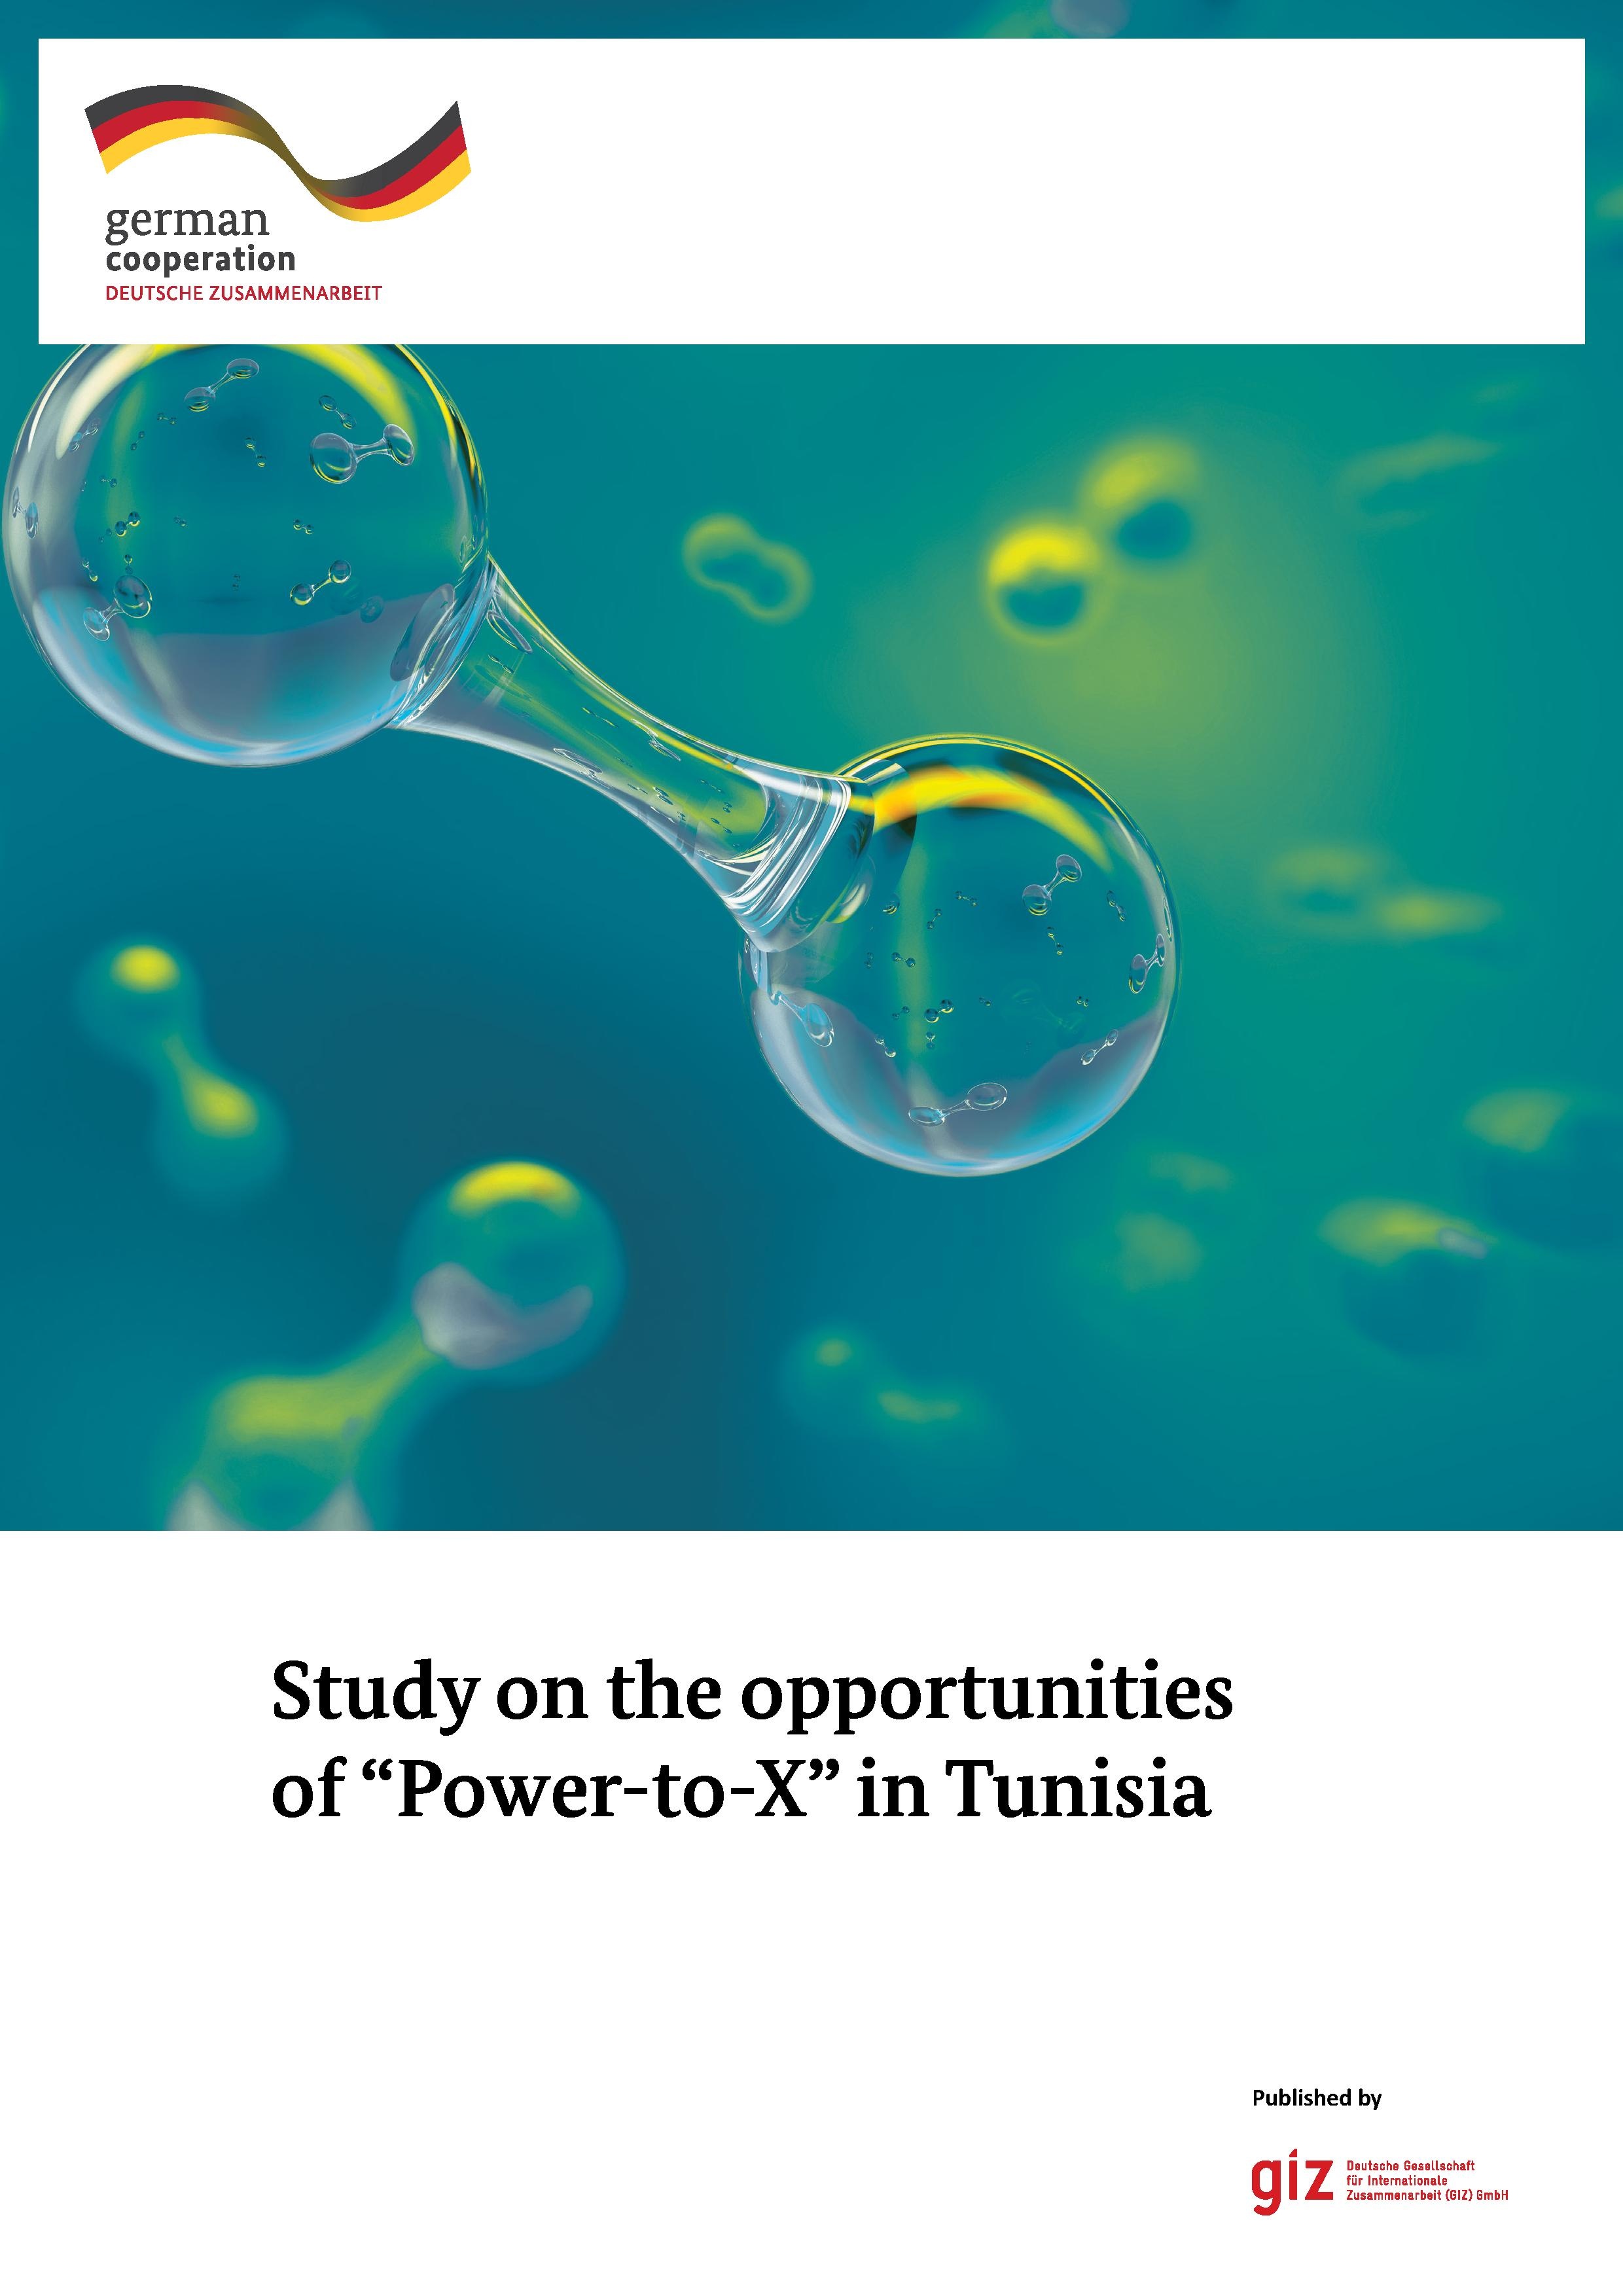 Potential study on Power-to-X in Tunisia